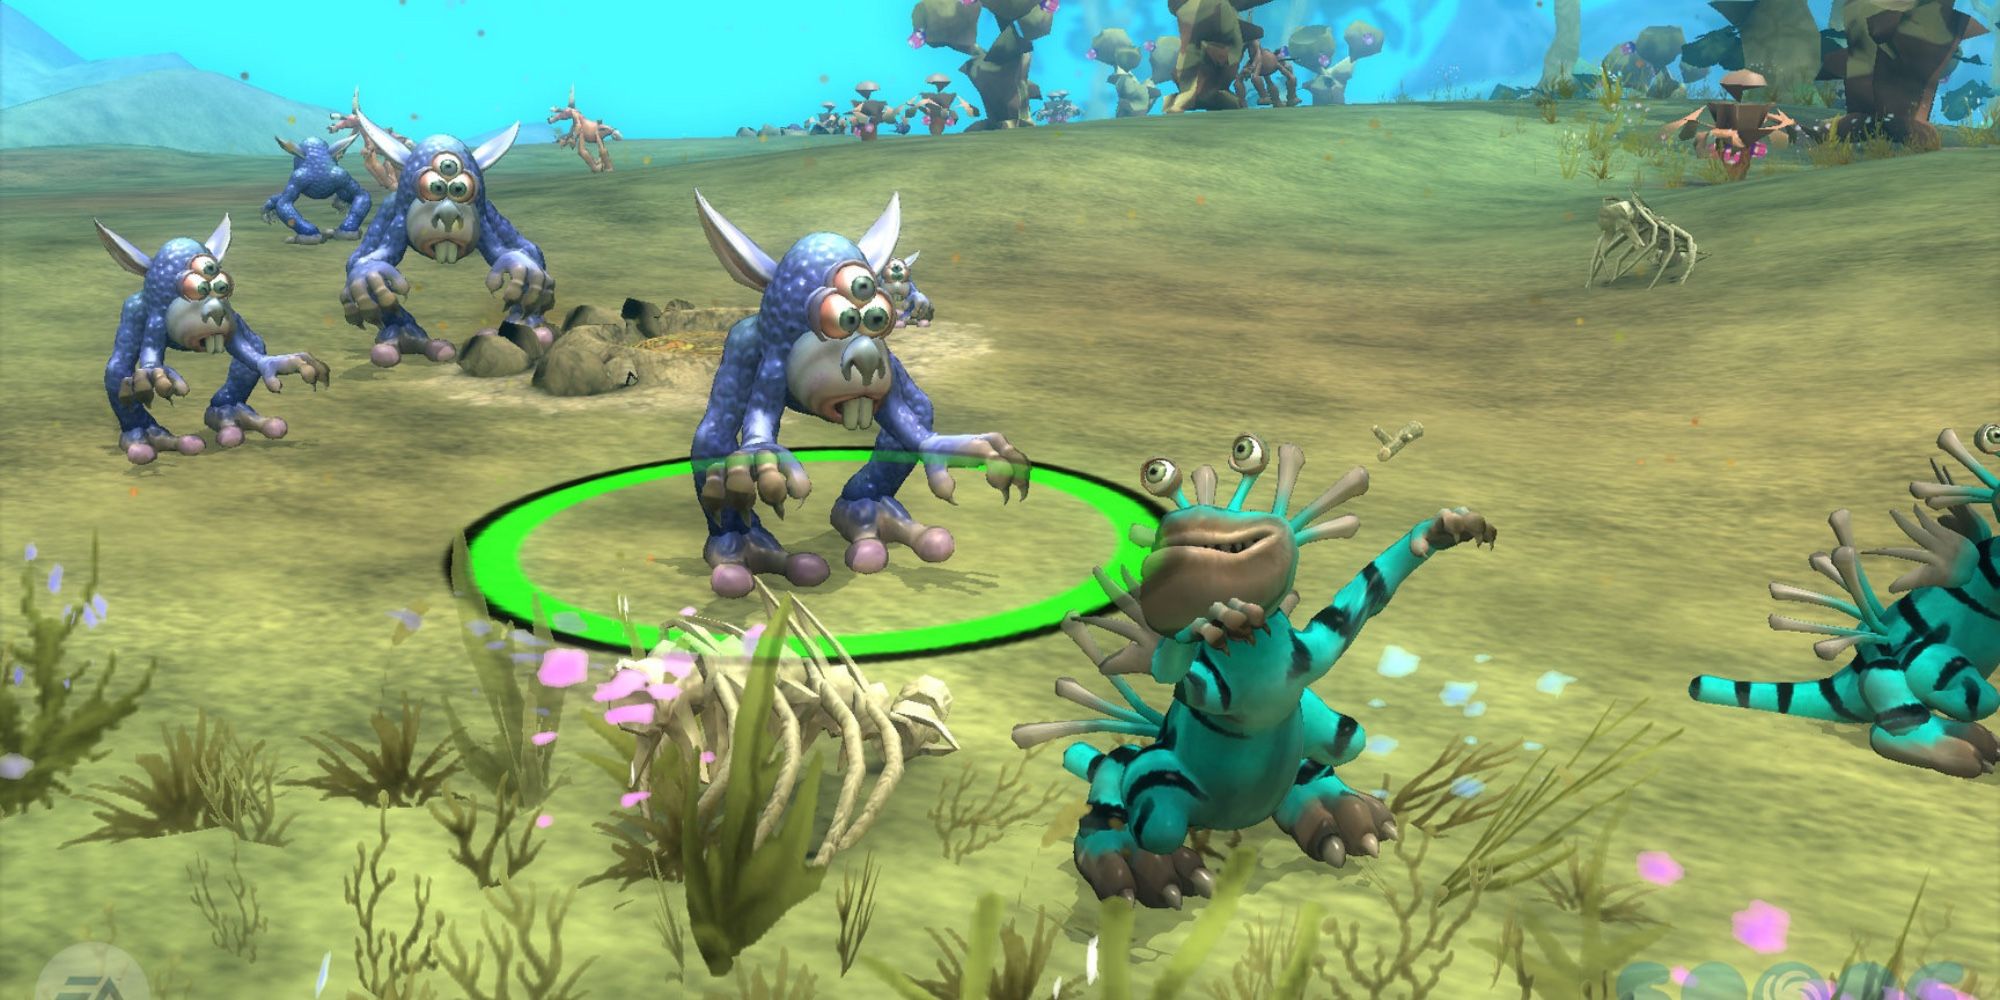 aliens in the game called spore